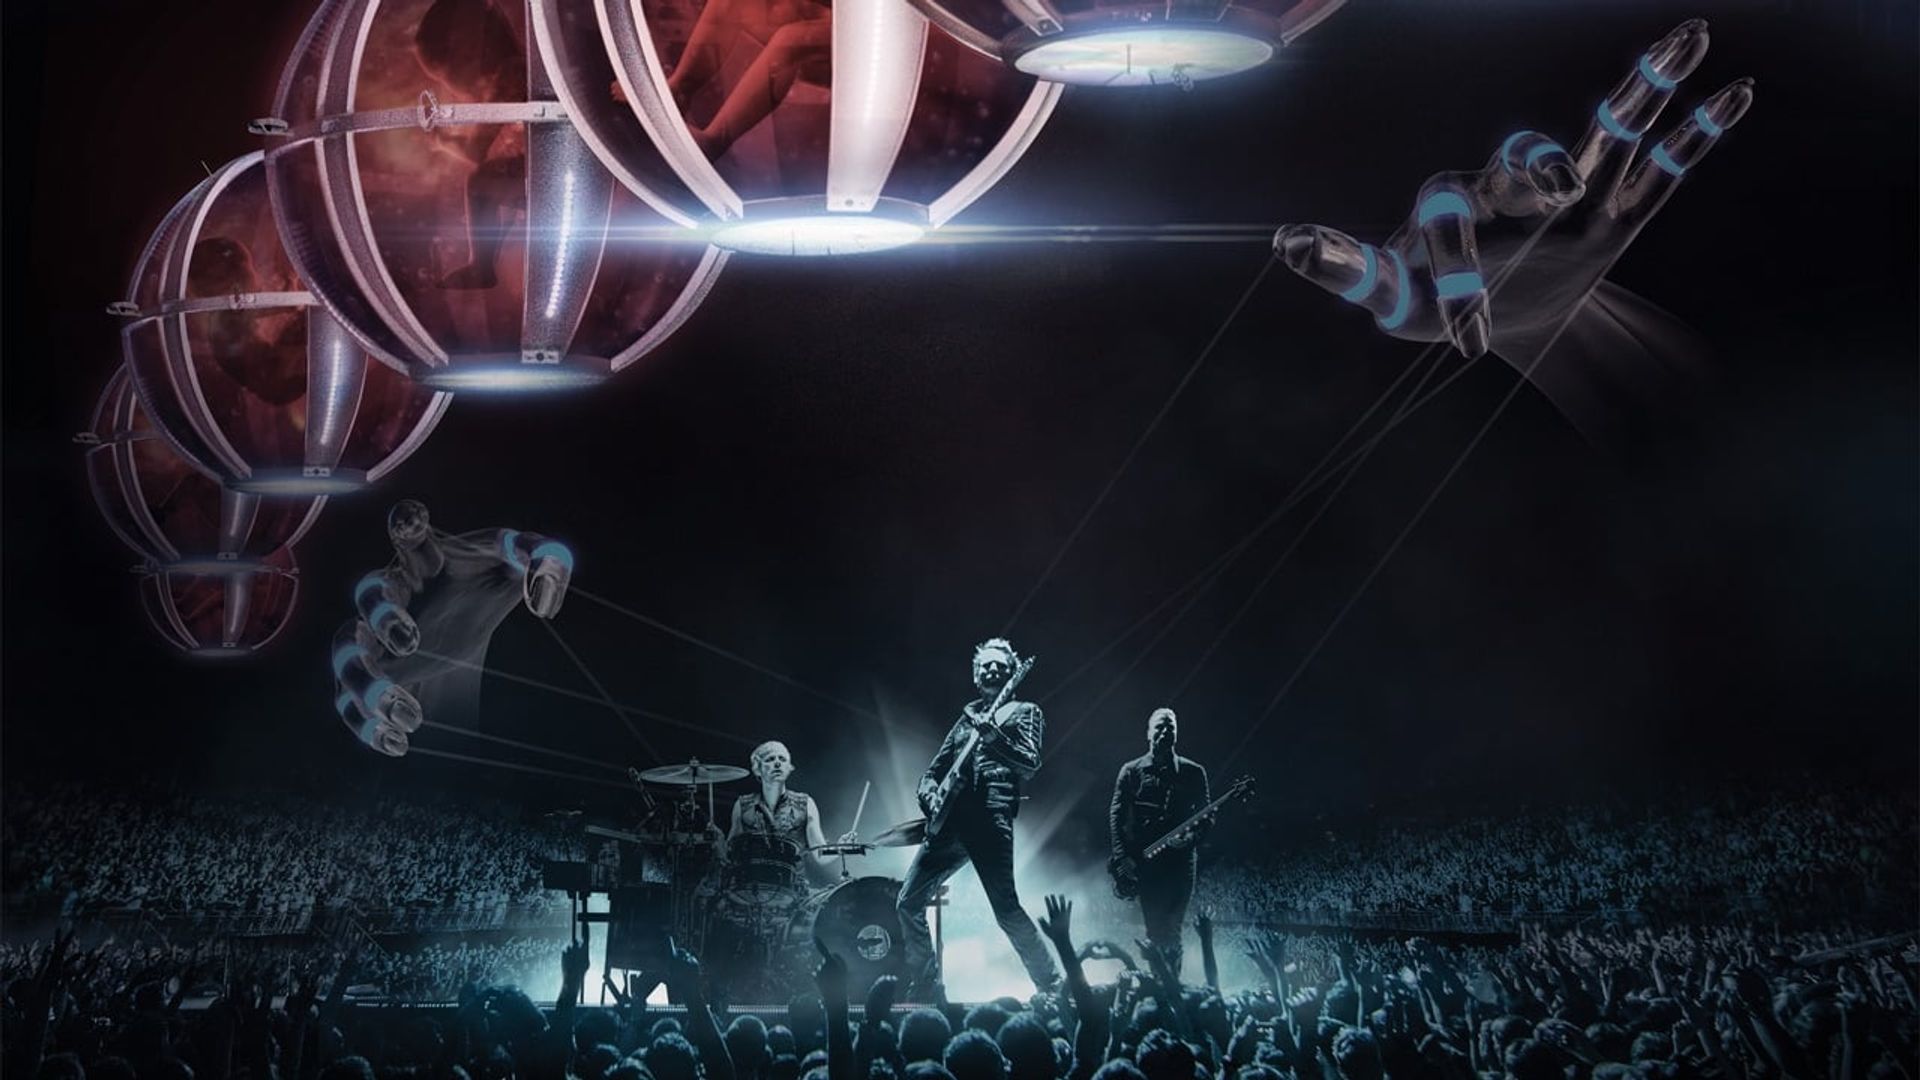 Muse Drones World Tour background